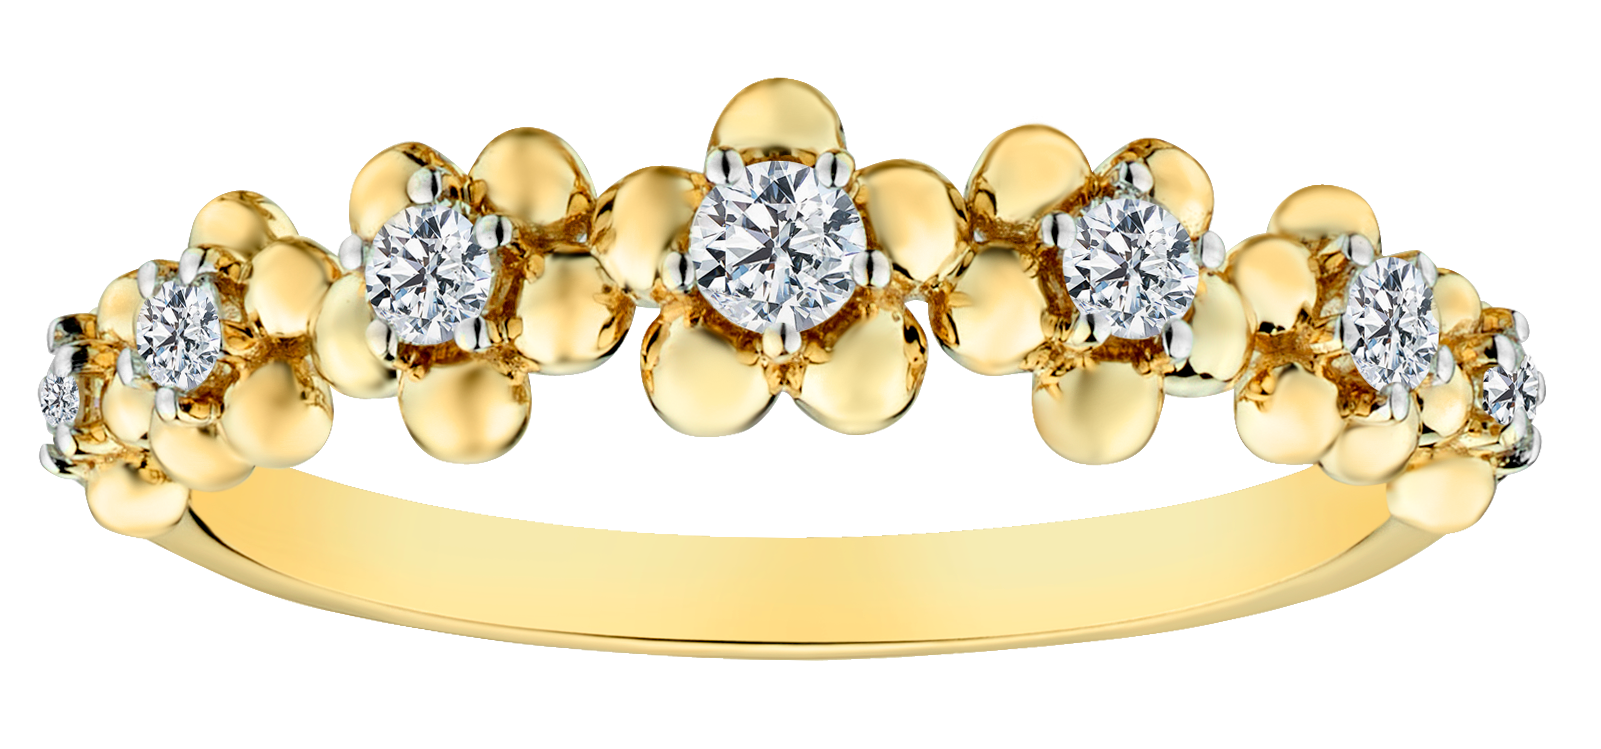 .25 Carat of Diamonds "Flower" Ring, 10kt Yellow Gold.....................NOW